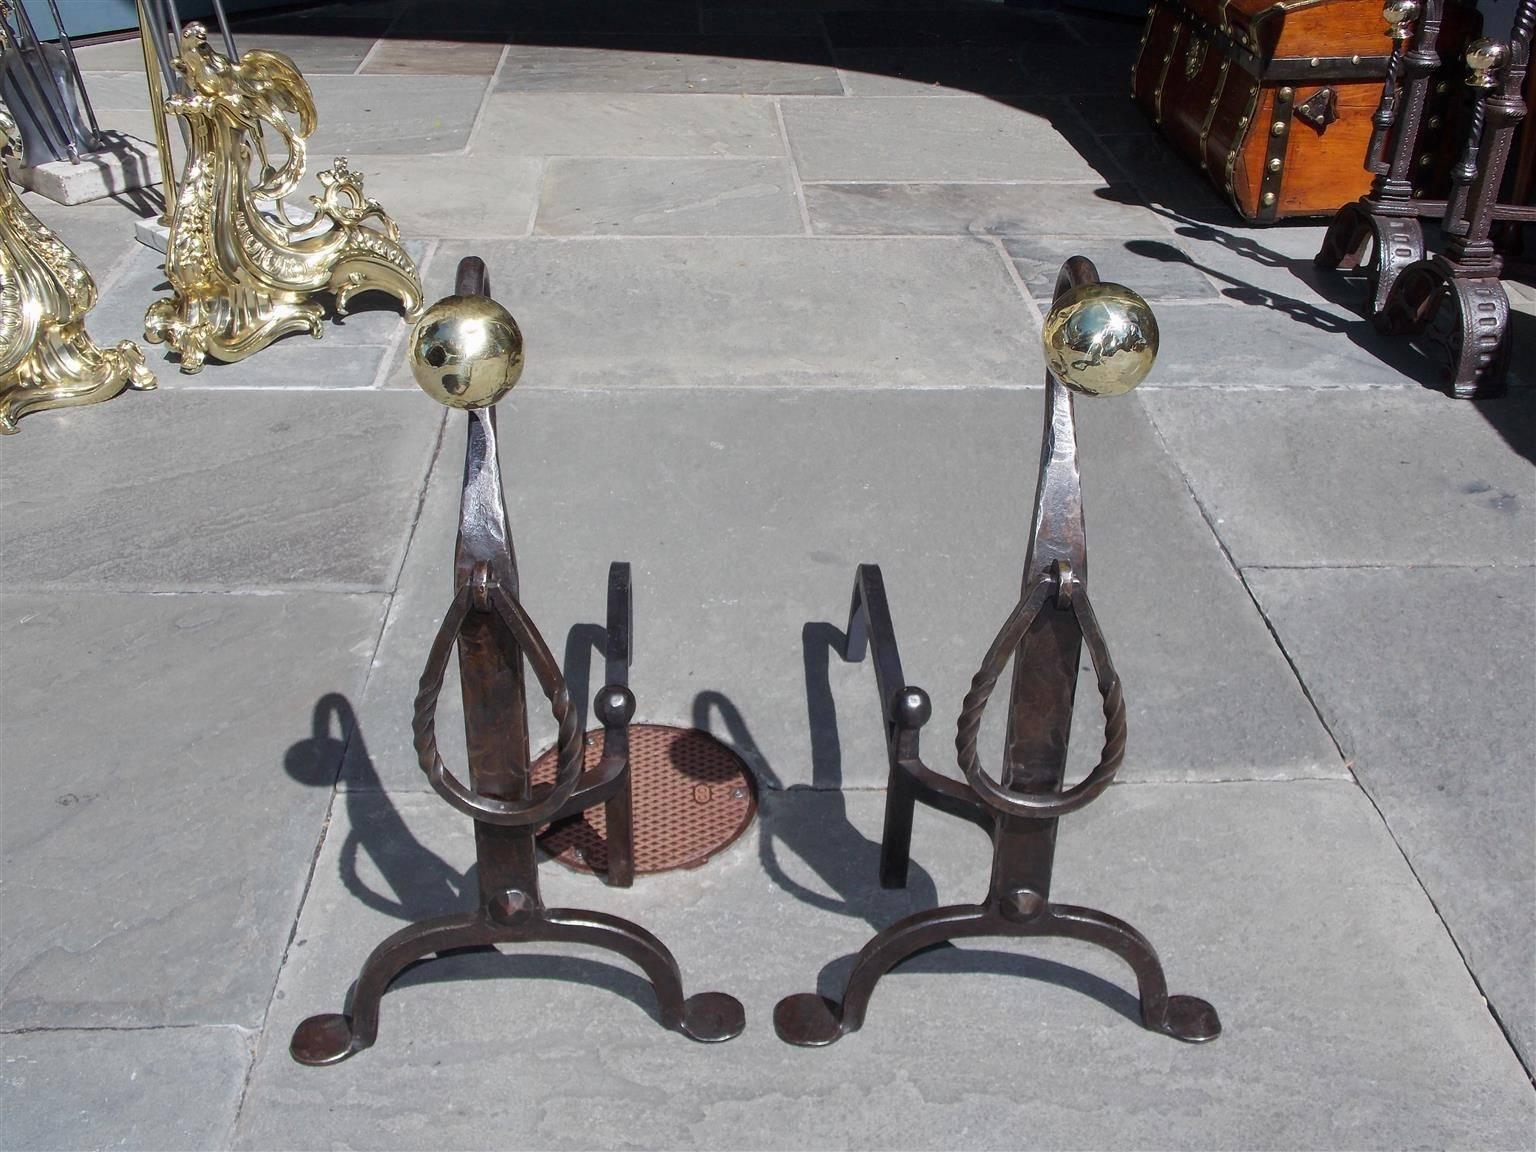 American wrought iron and brass ball top goose neck andirons with decorative spiral rings, tapered plinths, matching log stops and terminating on stylized penny feet, Early 19th Century.